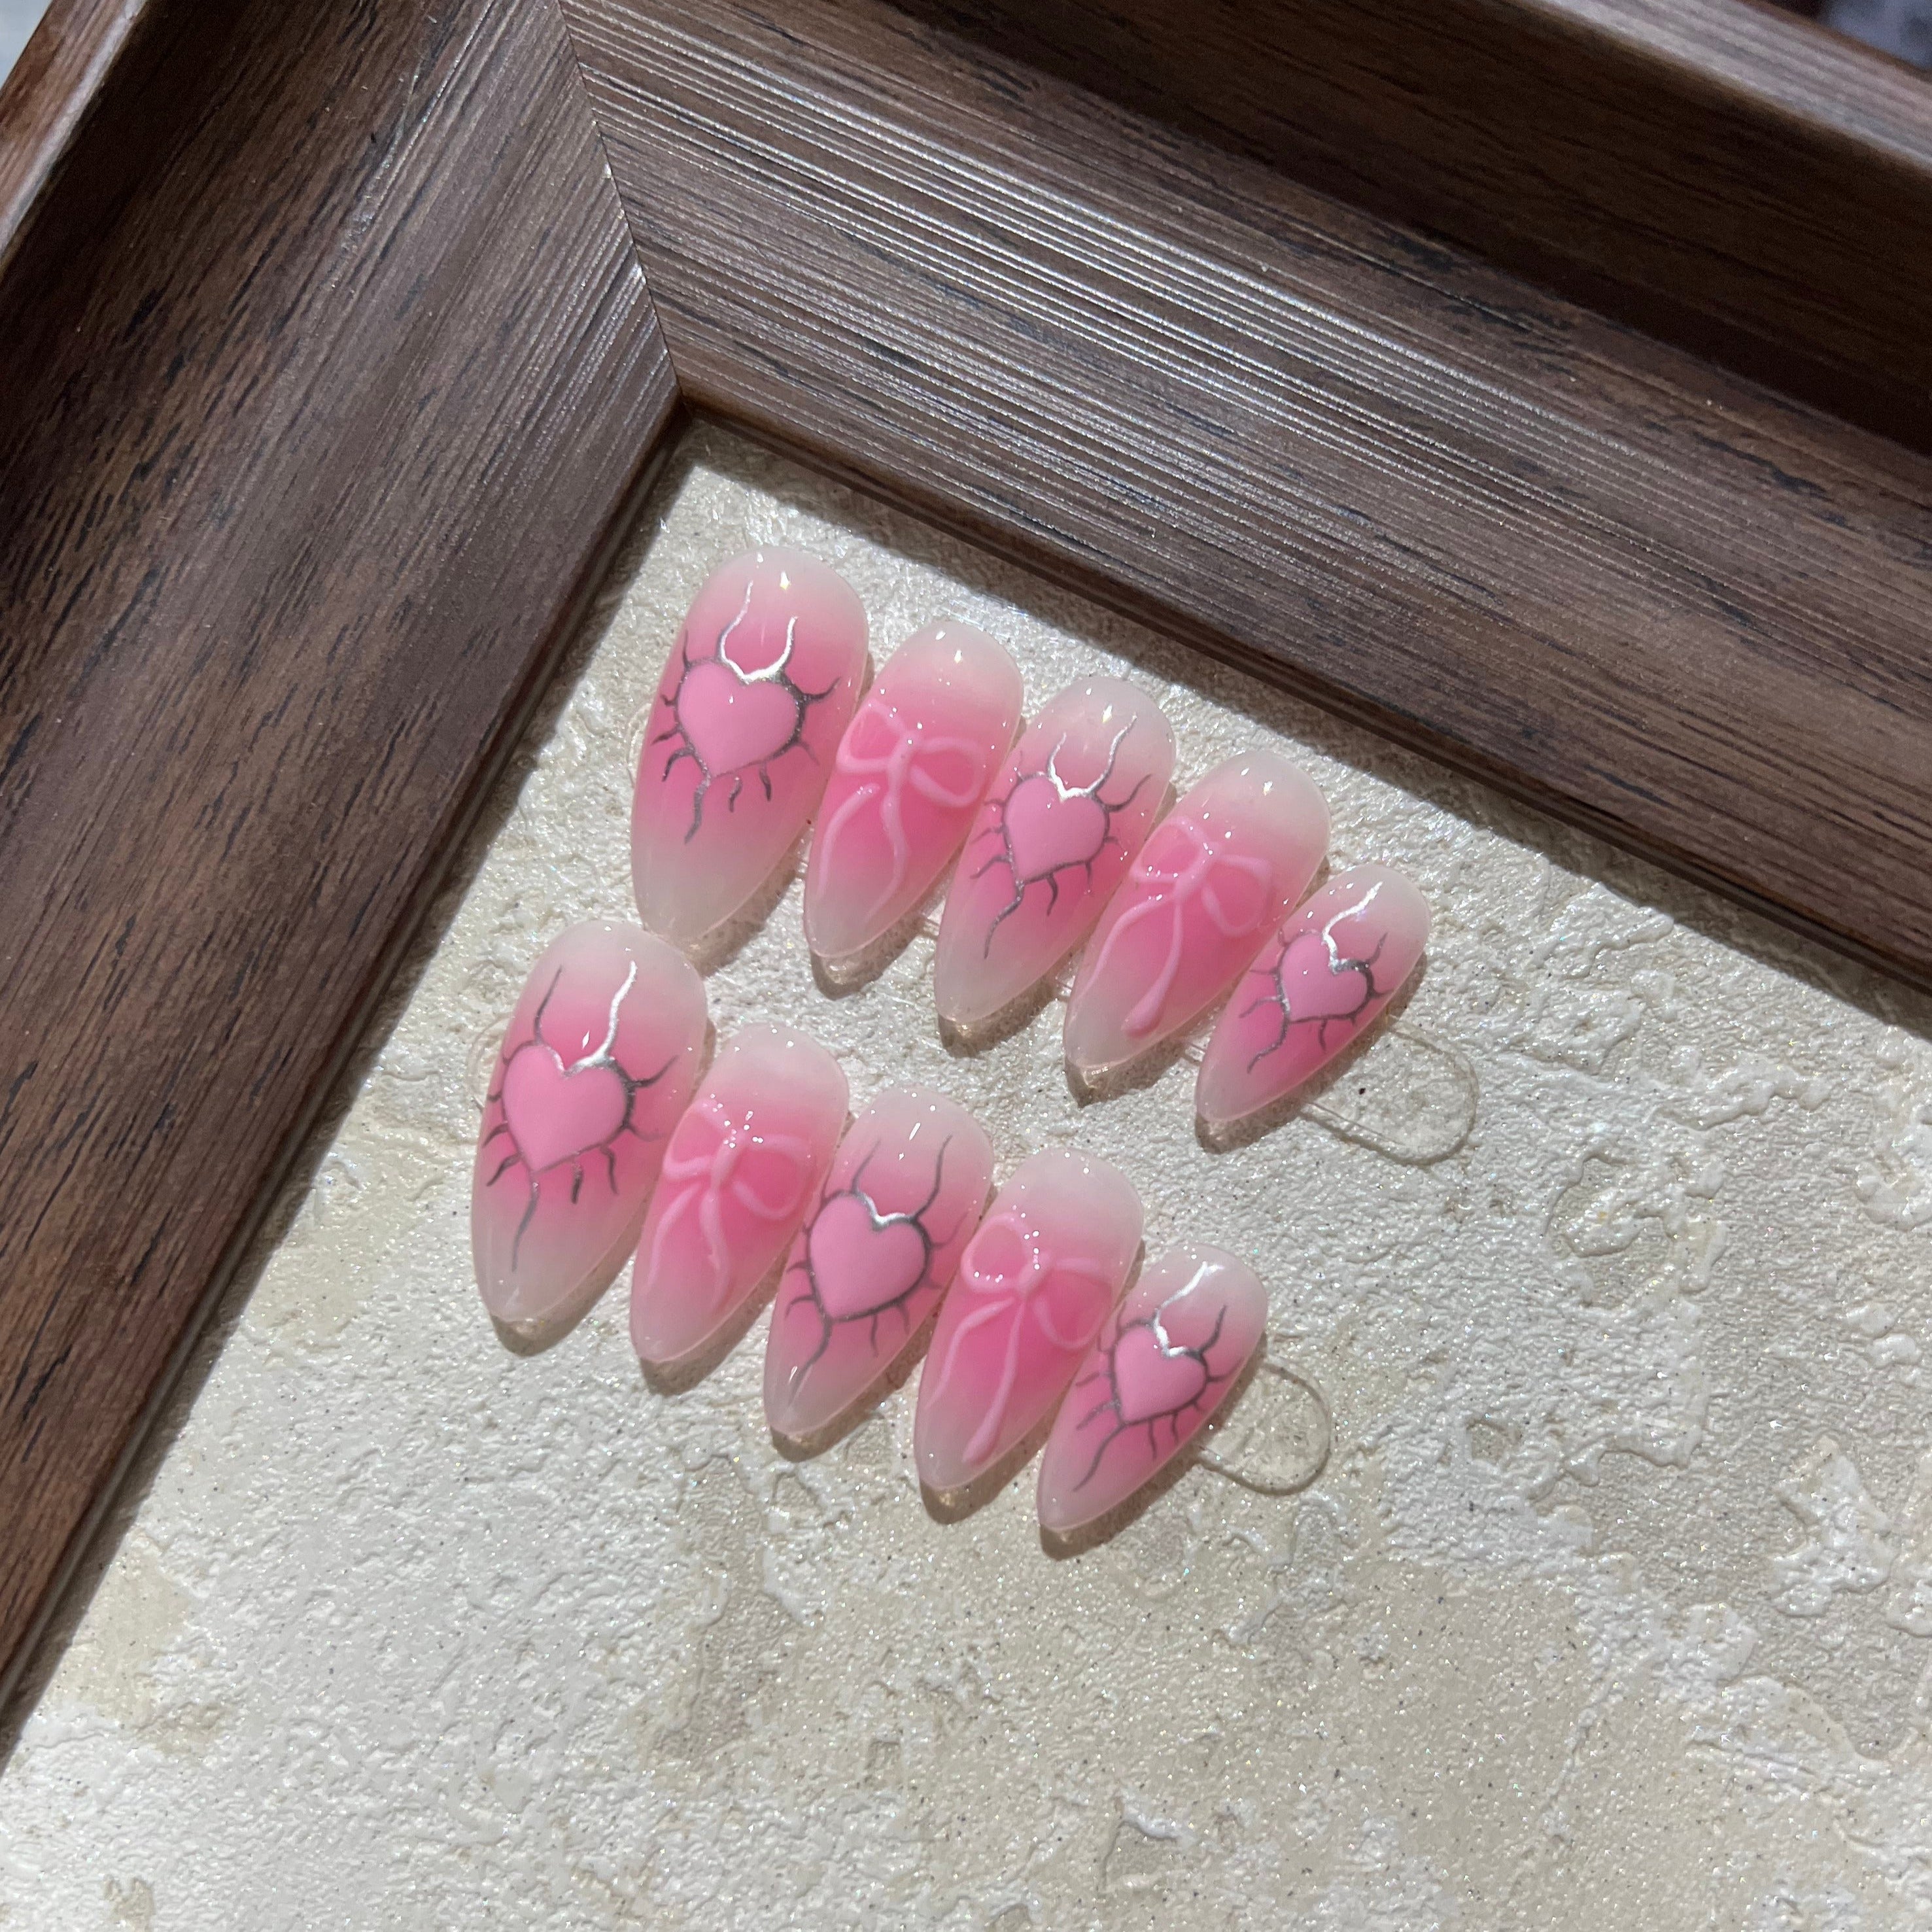 THROBBING HEART-TEN PIECES OF HANDCRAFTED PRESS ON NAIL